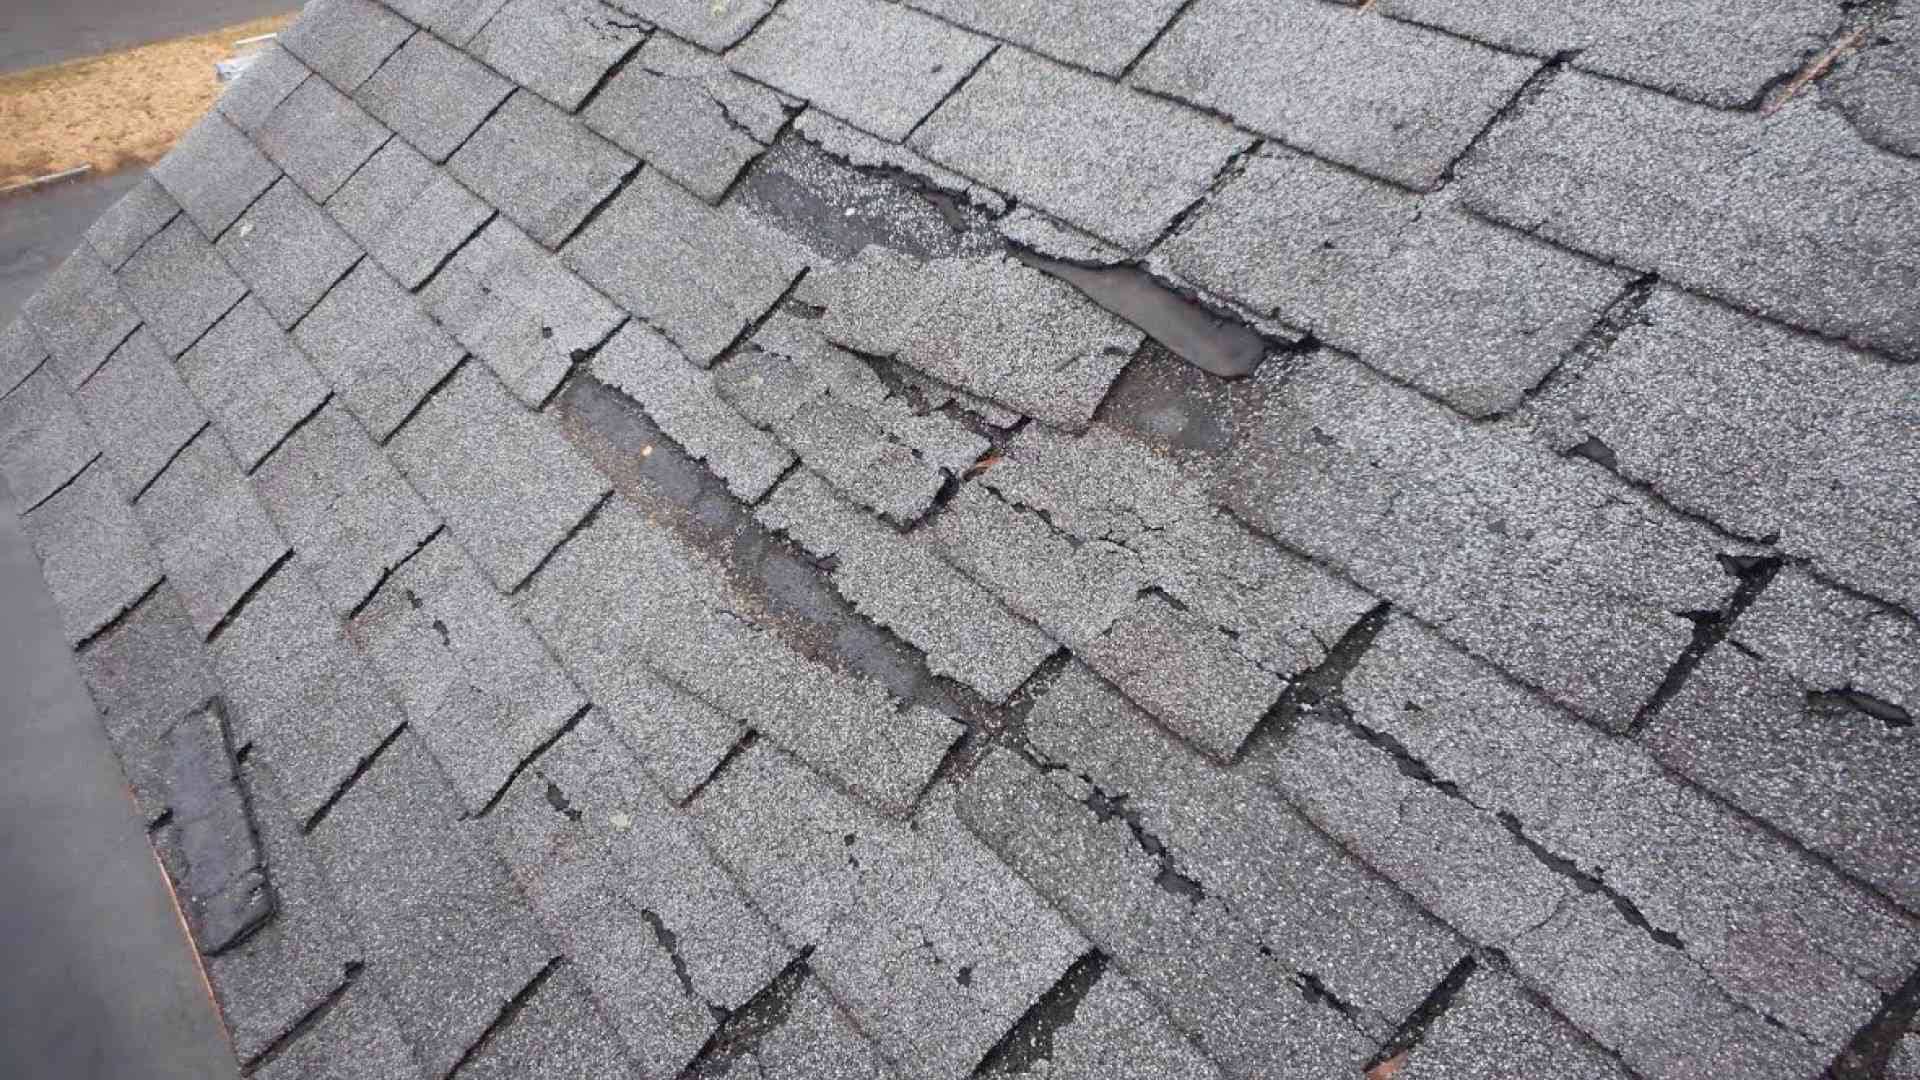 It's time to replace shingles on this Pennsylvania roof